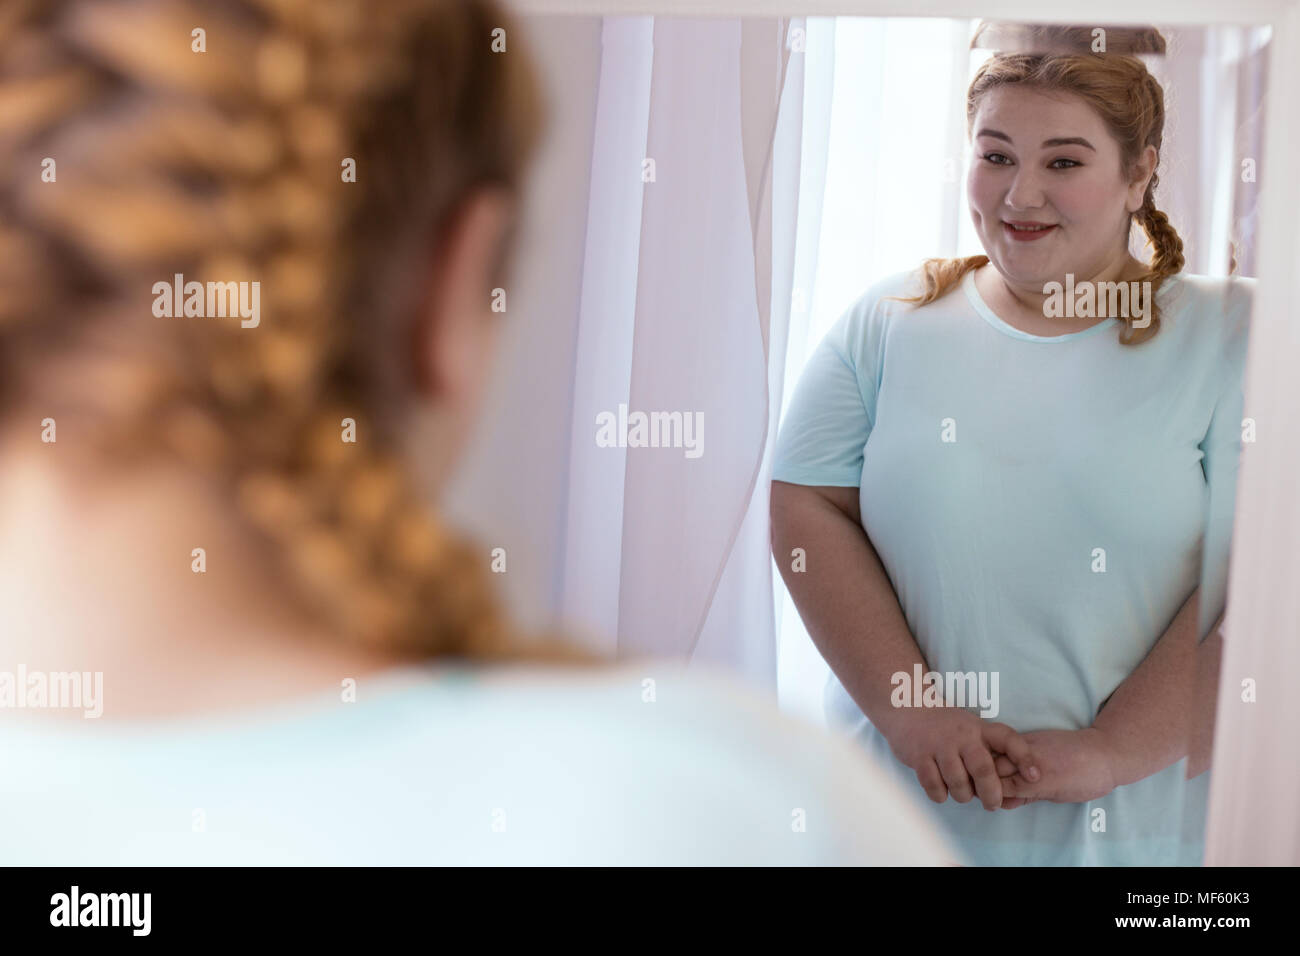 Pleasant good looking woman looking in the mirror Stock Photo